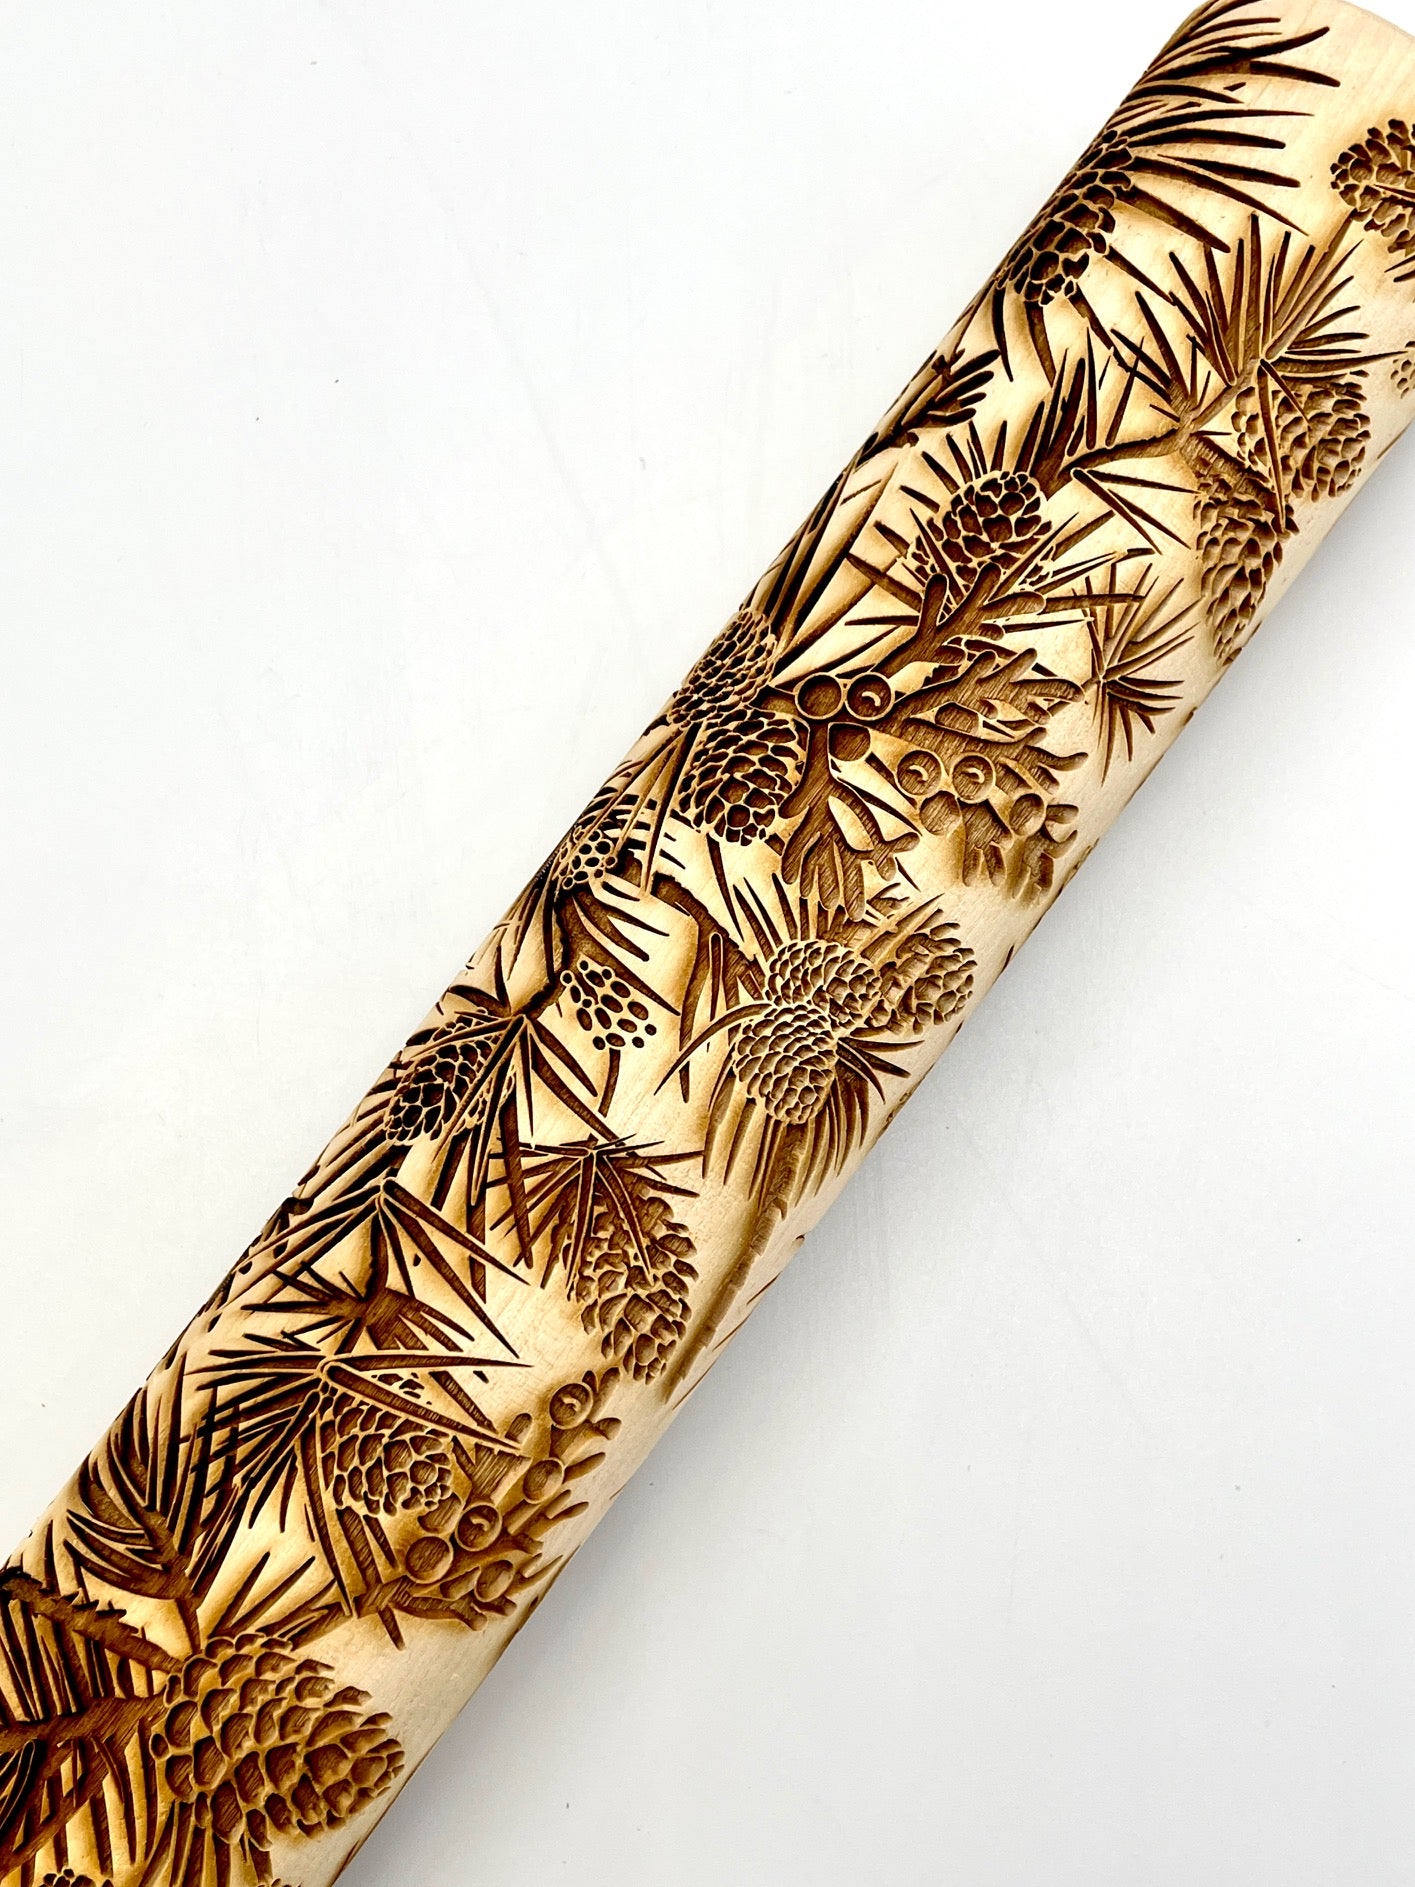 Pine Boughs Textured Rolling Pin